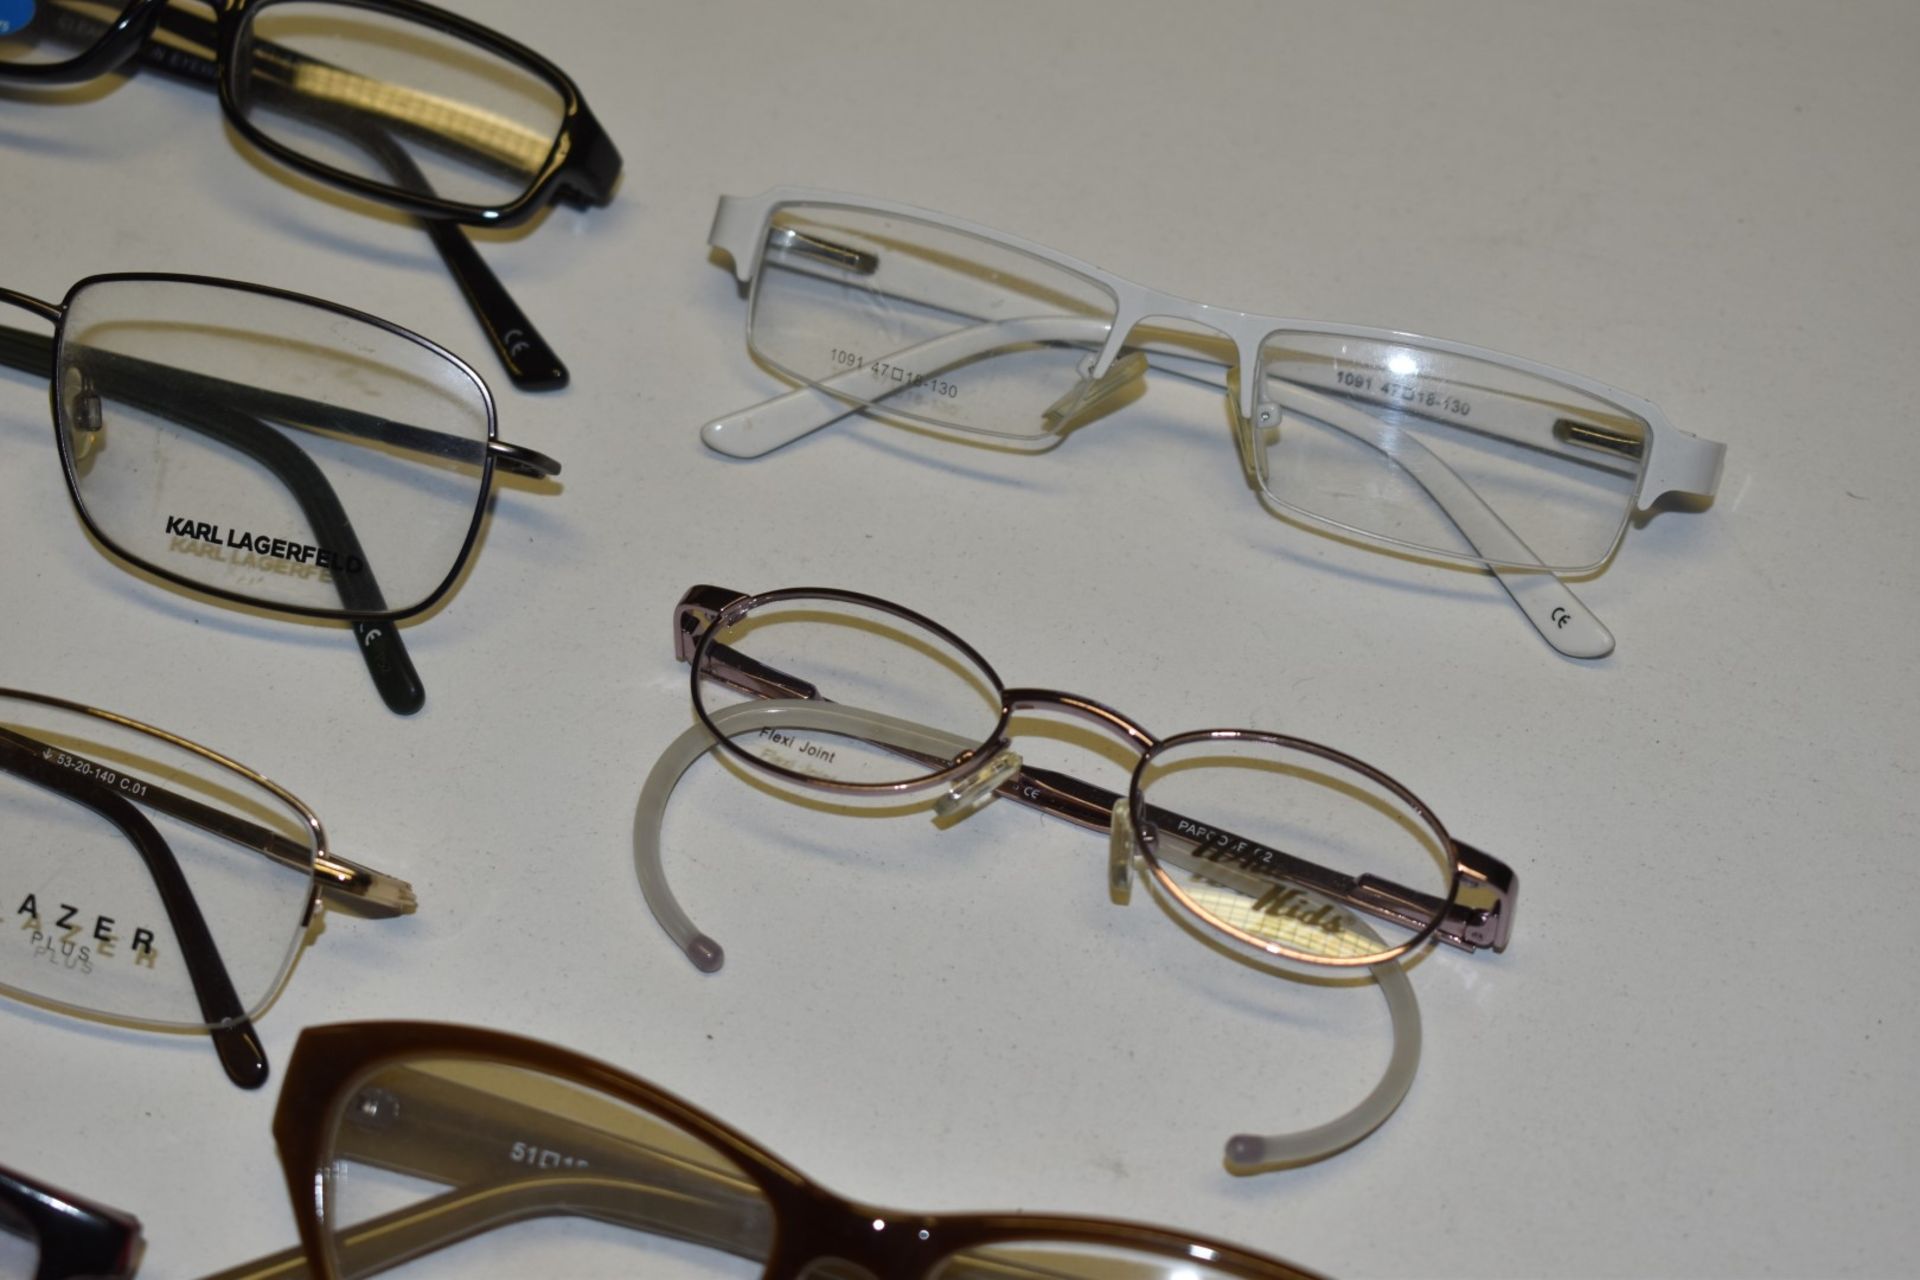 50 x Assorted Pairs of Spectacle Eye Glasses - New and Unused Stock - Various Designs and Brands - Image 11 of 15